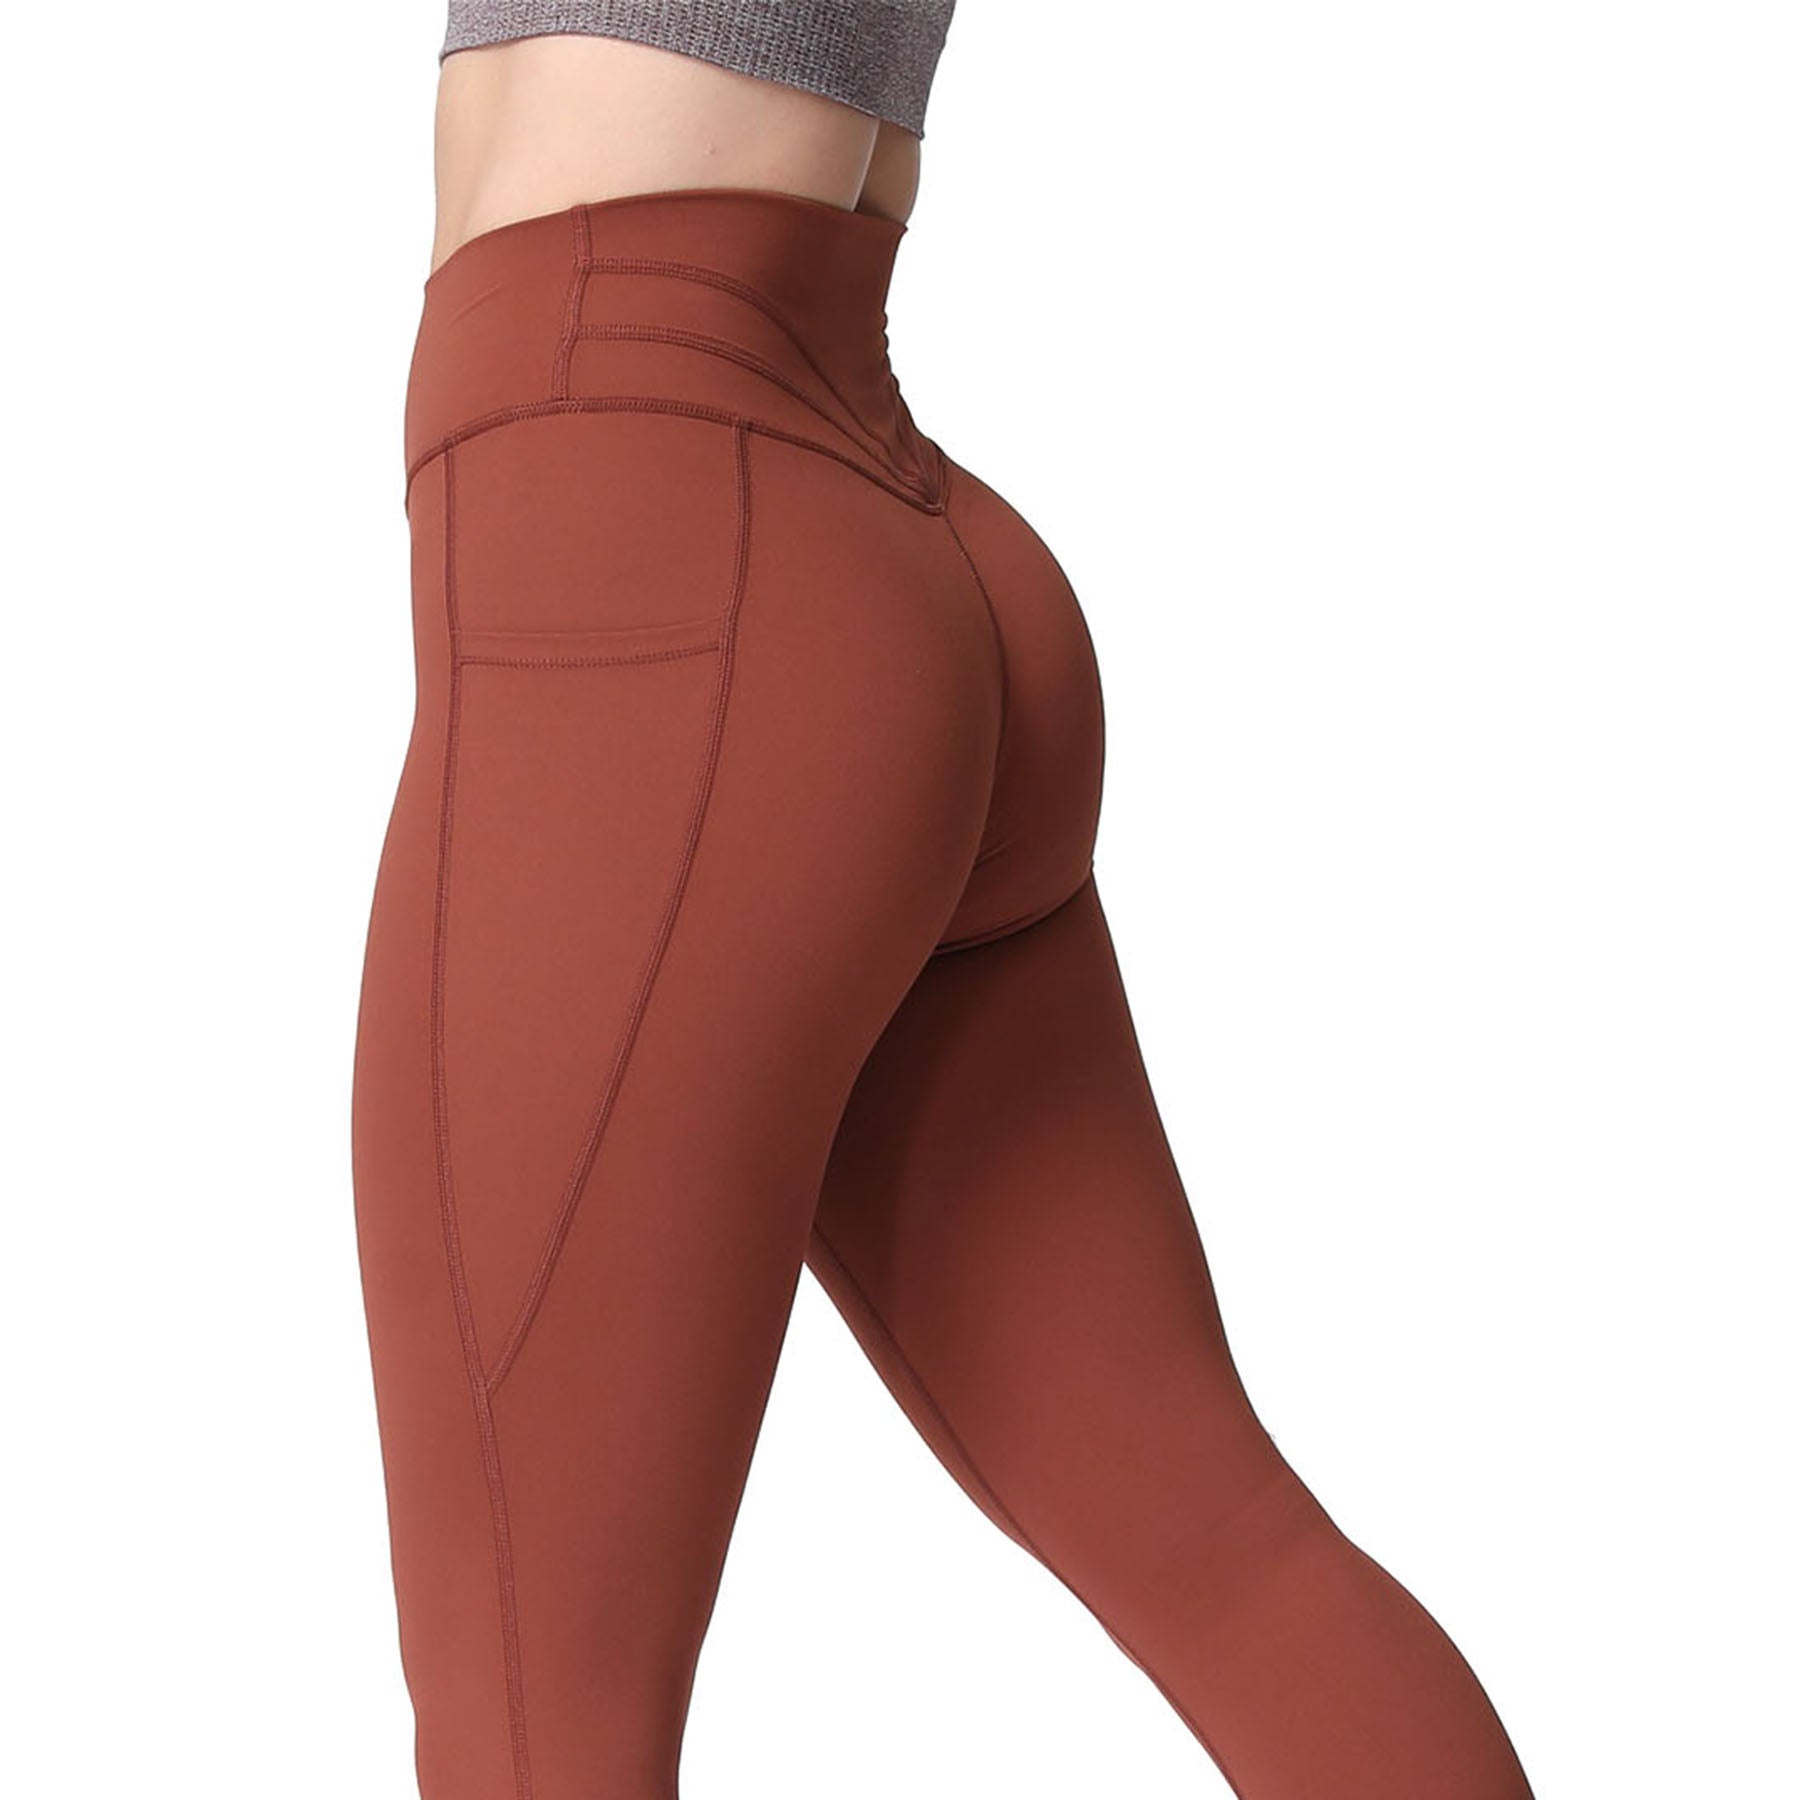 Aoxjox Trinity Leggings Could Give You an Instant Hourglass Figure